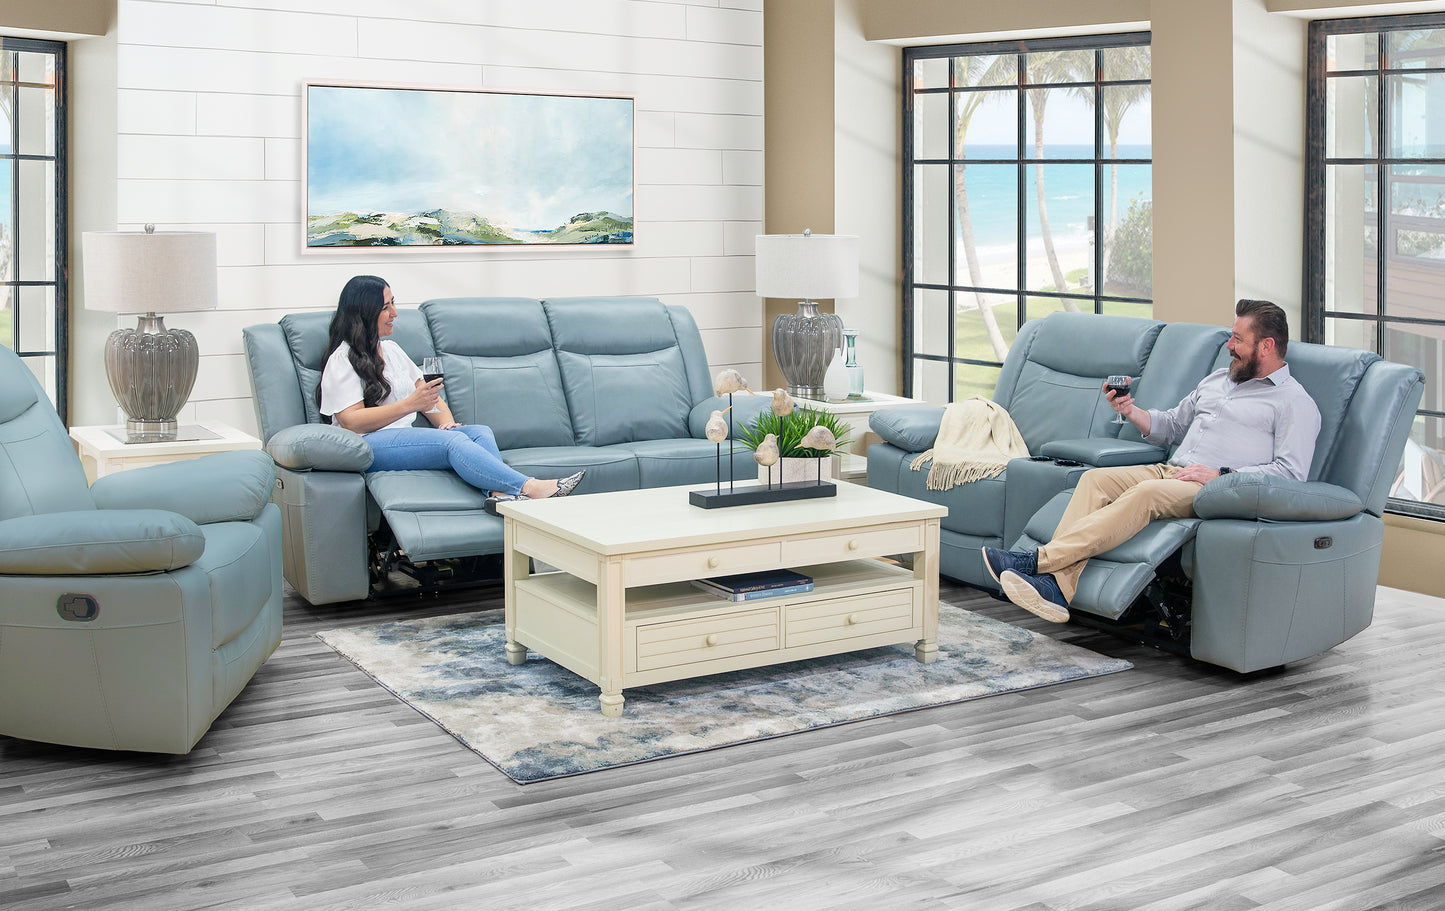 Dallas Teal 5 Piece Leather Living Room